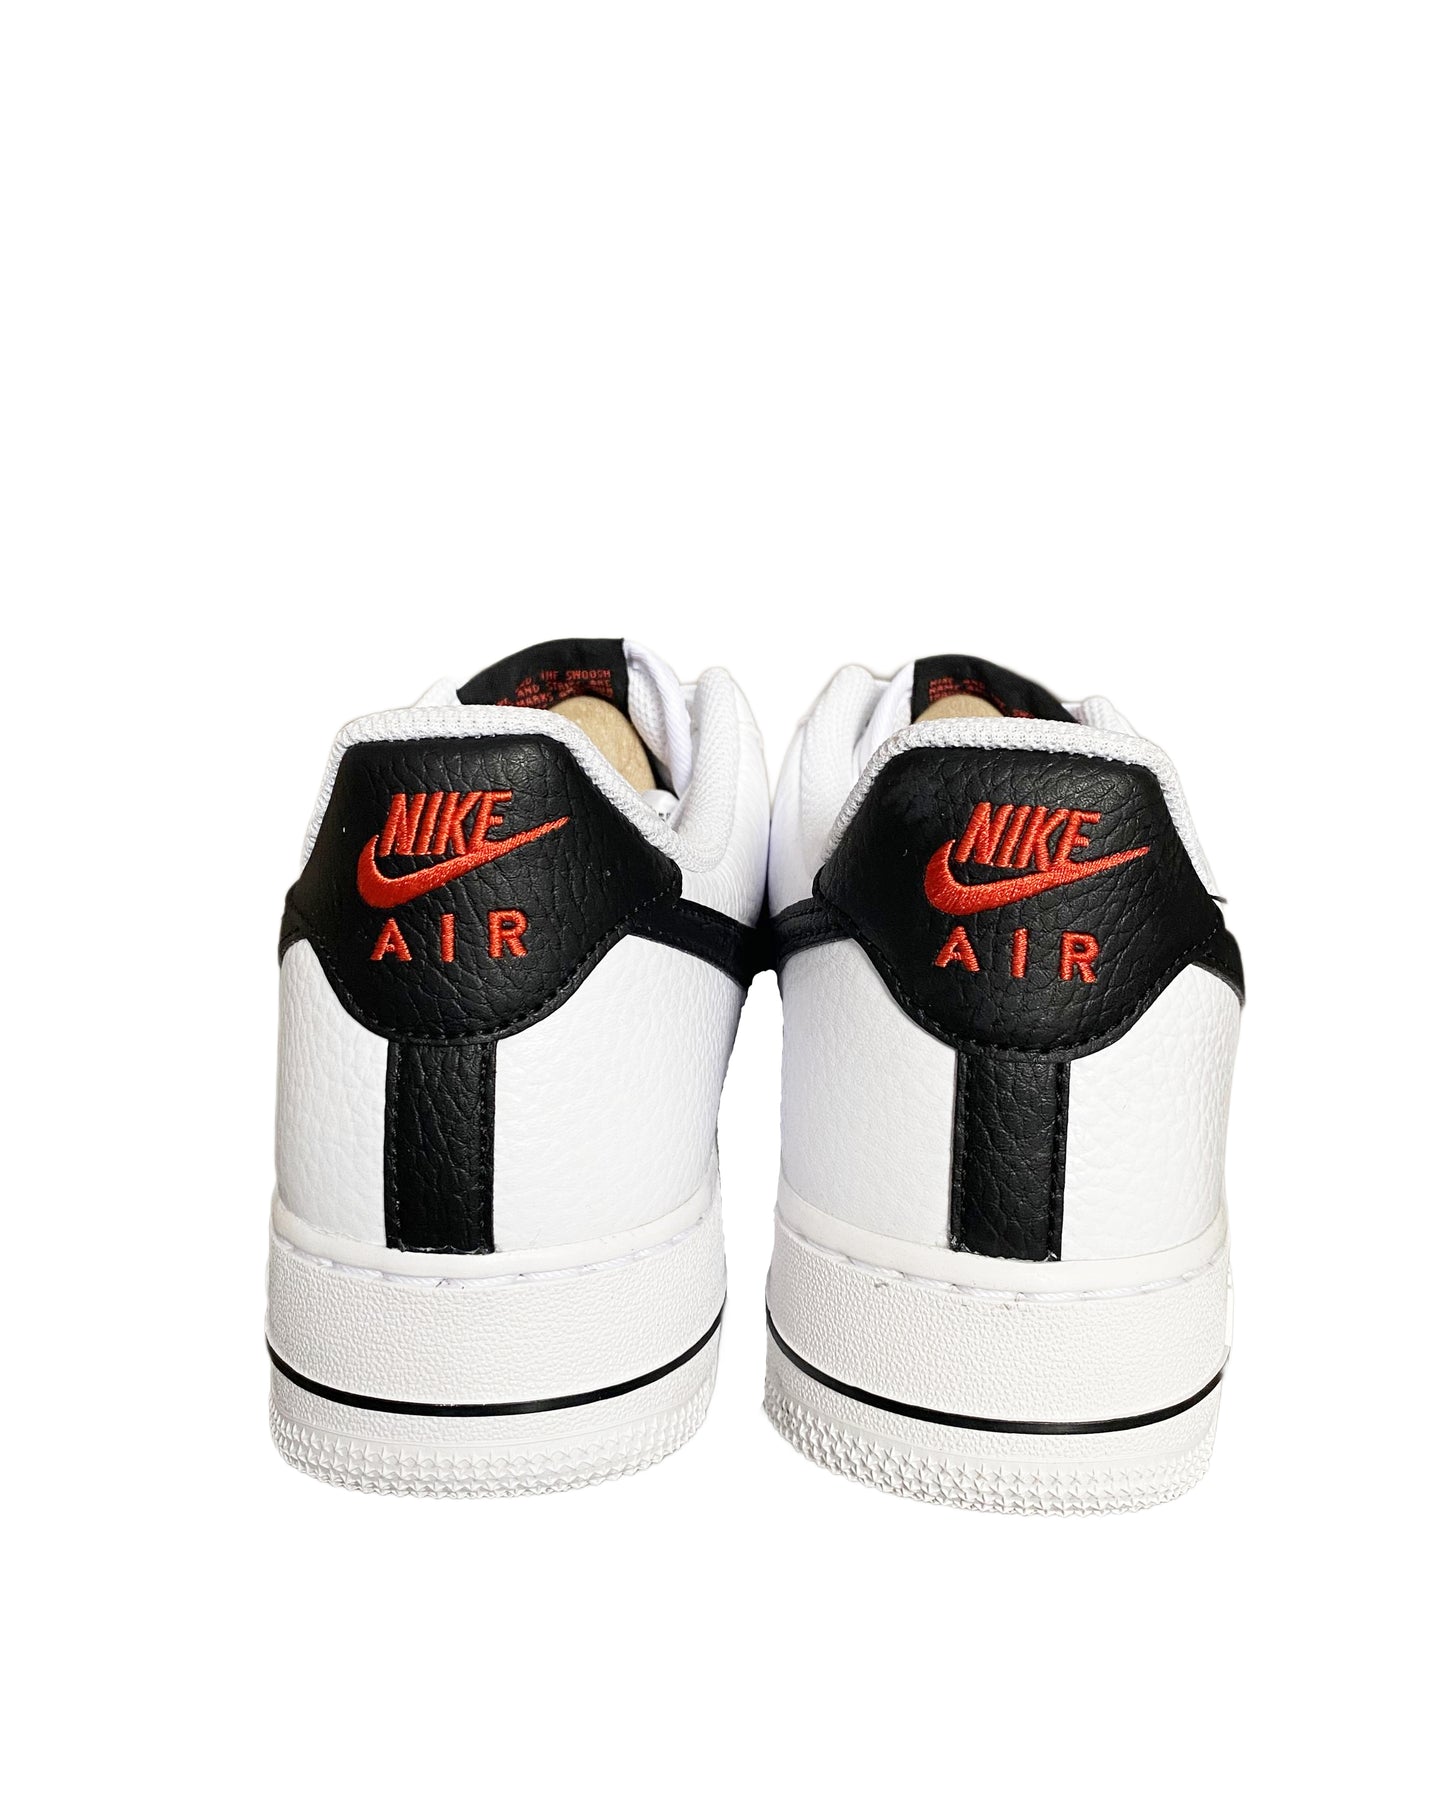 NIKE AIR FORCE 1 LOW 07 "WHITE BLACK HABANERO RED "